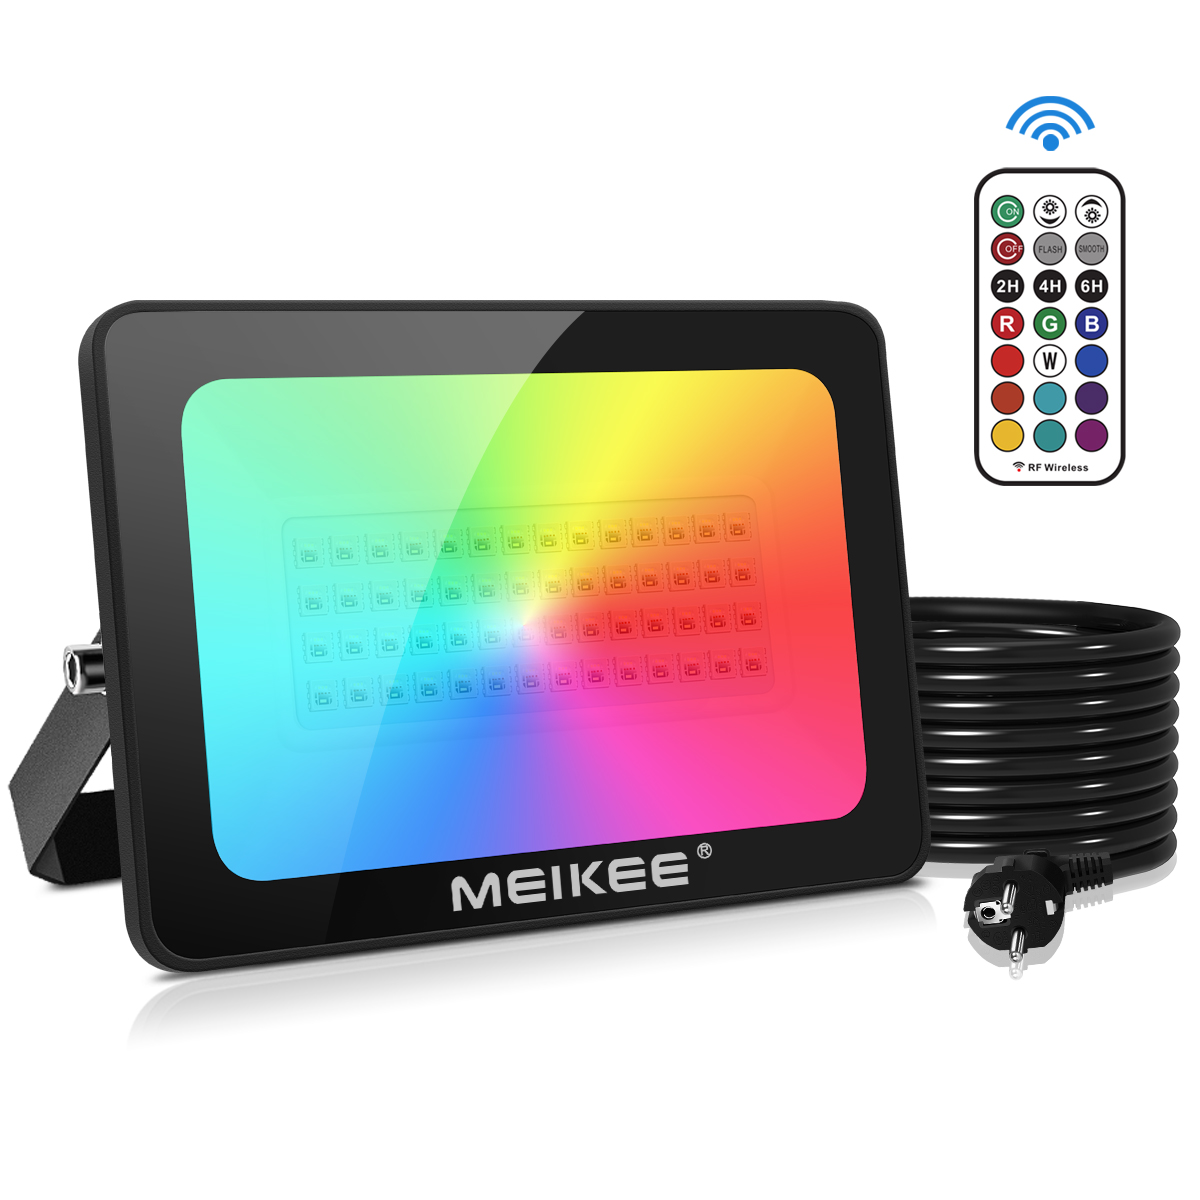 MEIKEE 60W RGB Lights Led Floodlight 16 Colors 4 Modes Remote Control Christmas Lights IP66 Waterproof Colour Changing Light Outdoor Decoration for Halloween Birthday Party Easter Strobe Garden Pond